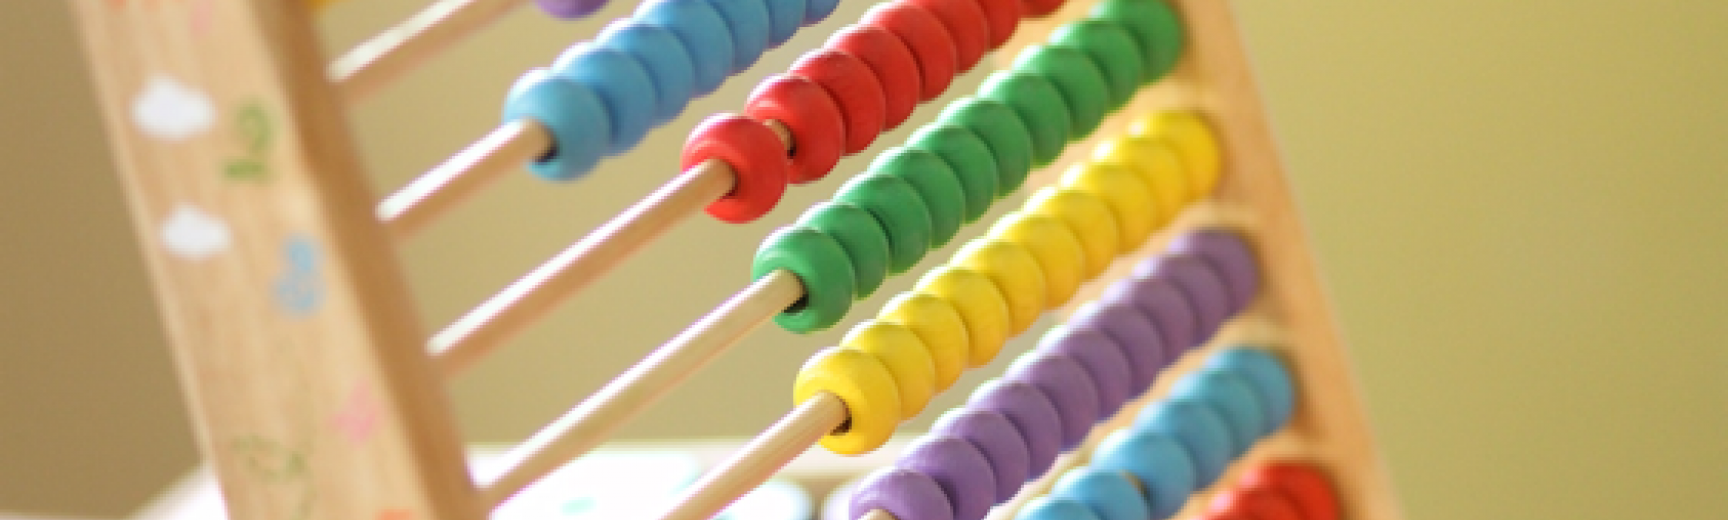 Colourful abacus